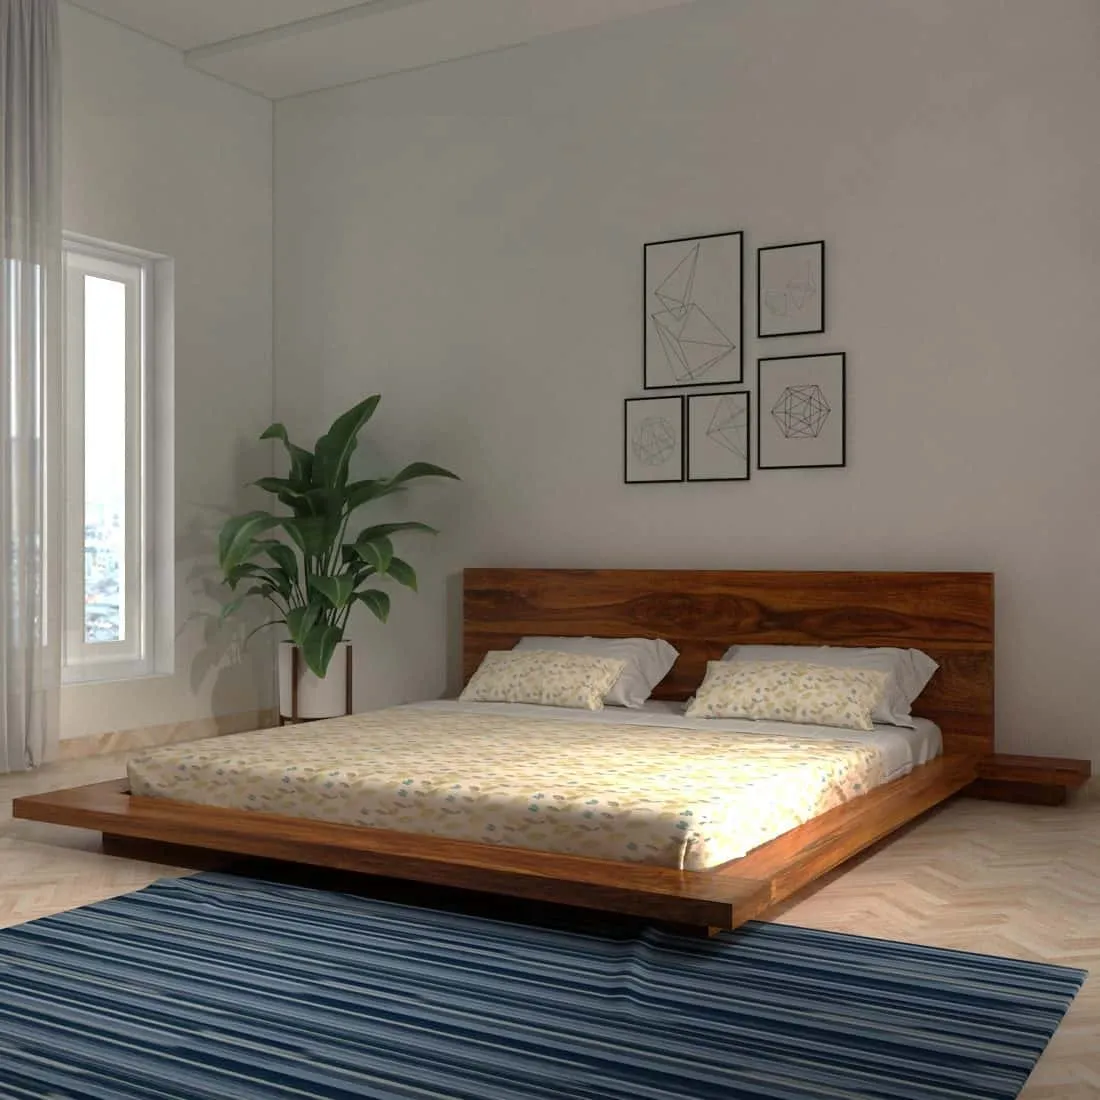 wooden frame platform double size bed design photo at affordable price, indoor green plant, white walls, pillows and mattress, blue rug